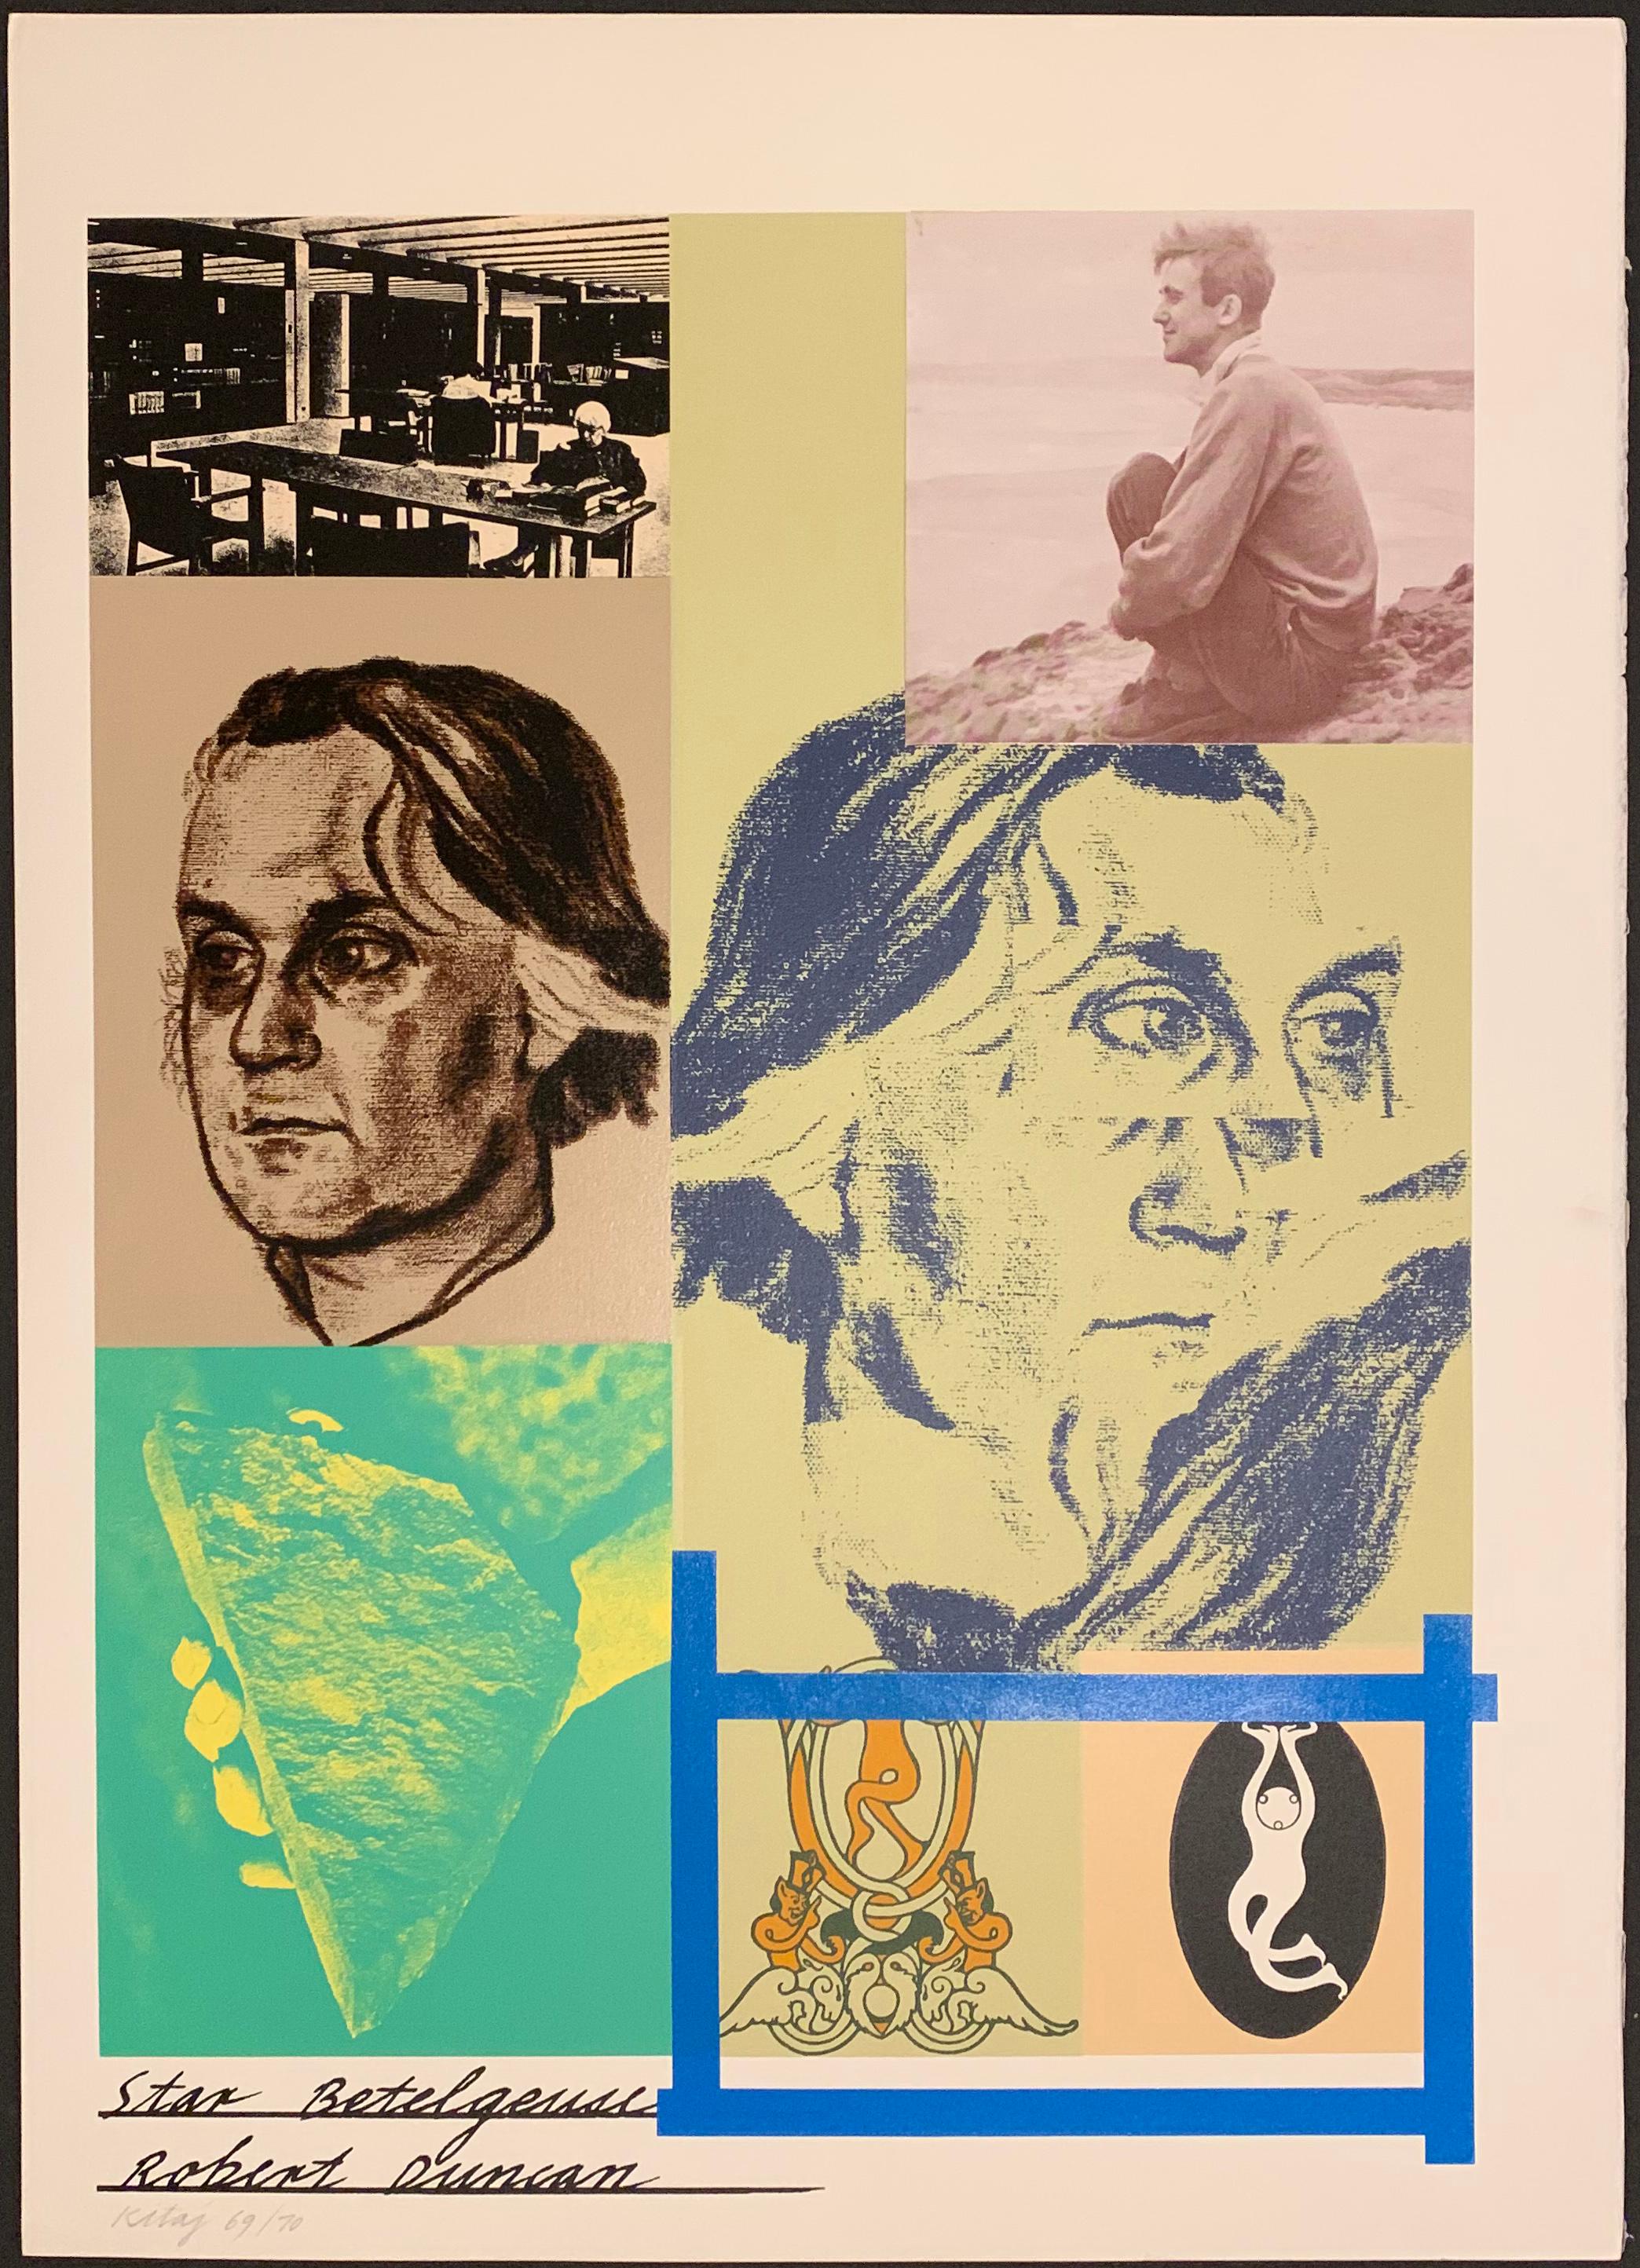 Kitaj, R. B. FIRST SERIES - SOME POETS. Marlborough AG, Schellenburg, FL, 1970. Number 69 of the edition of 70 (there were about 15 additional proofs for the Artist, the Printer, and hors Commerce). Very large folio (31 x 23 inches) black